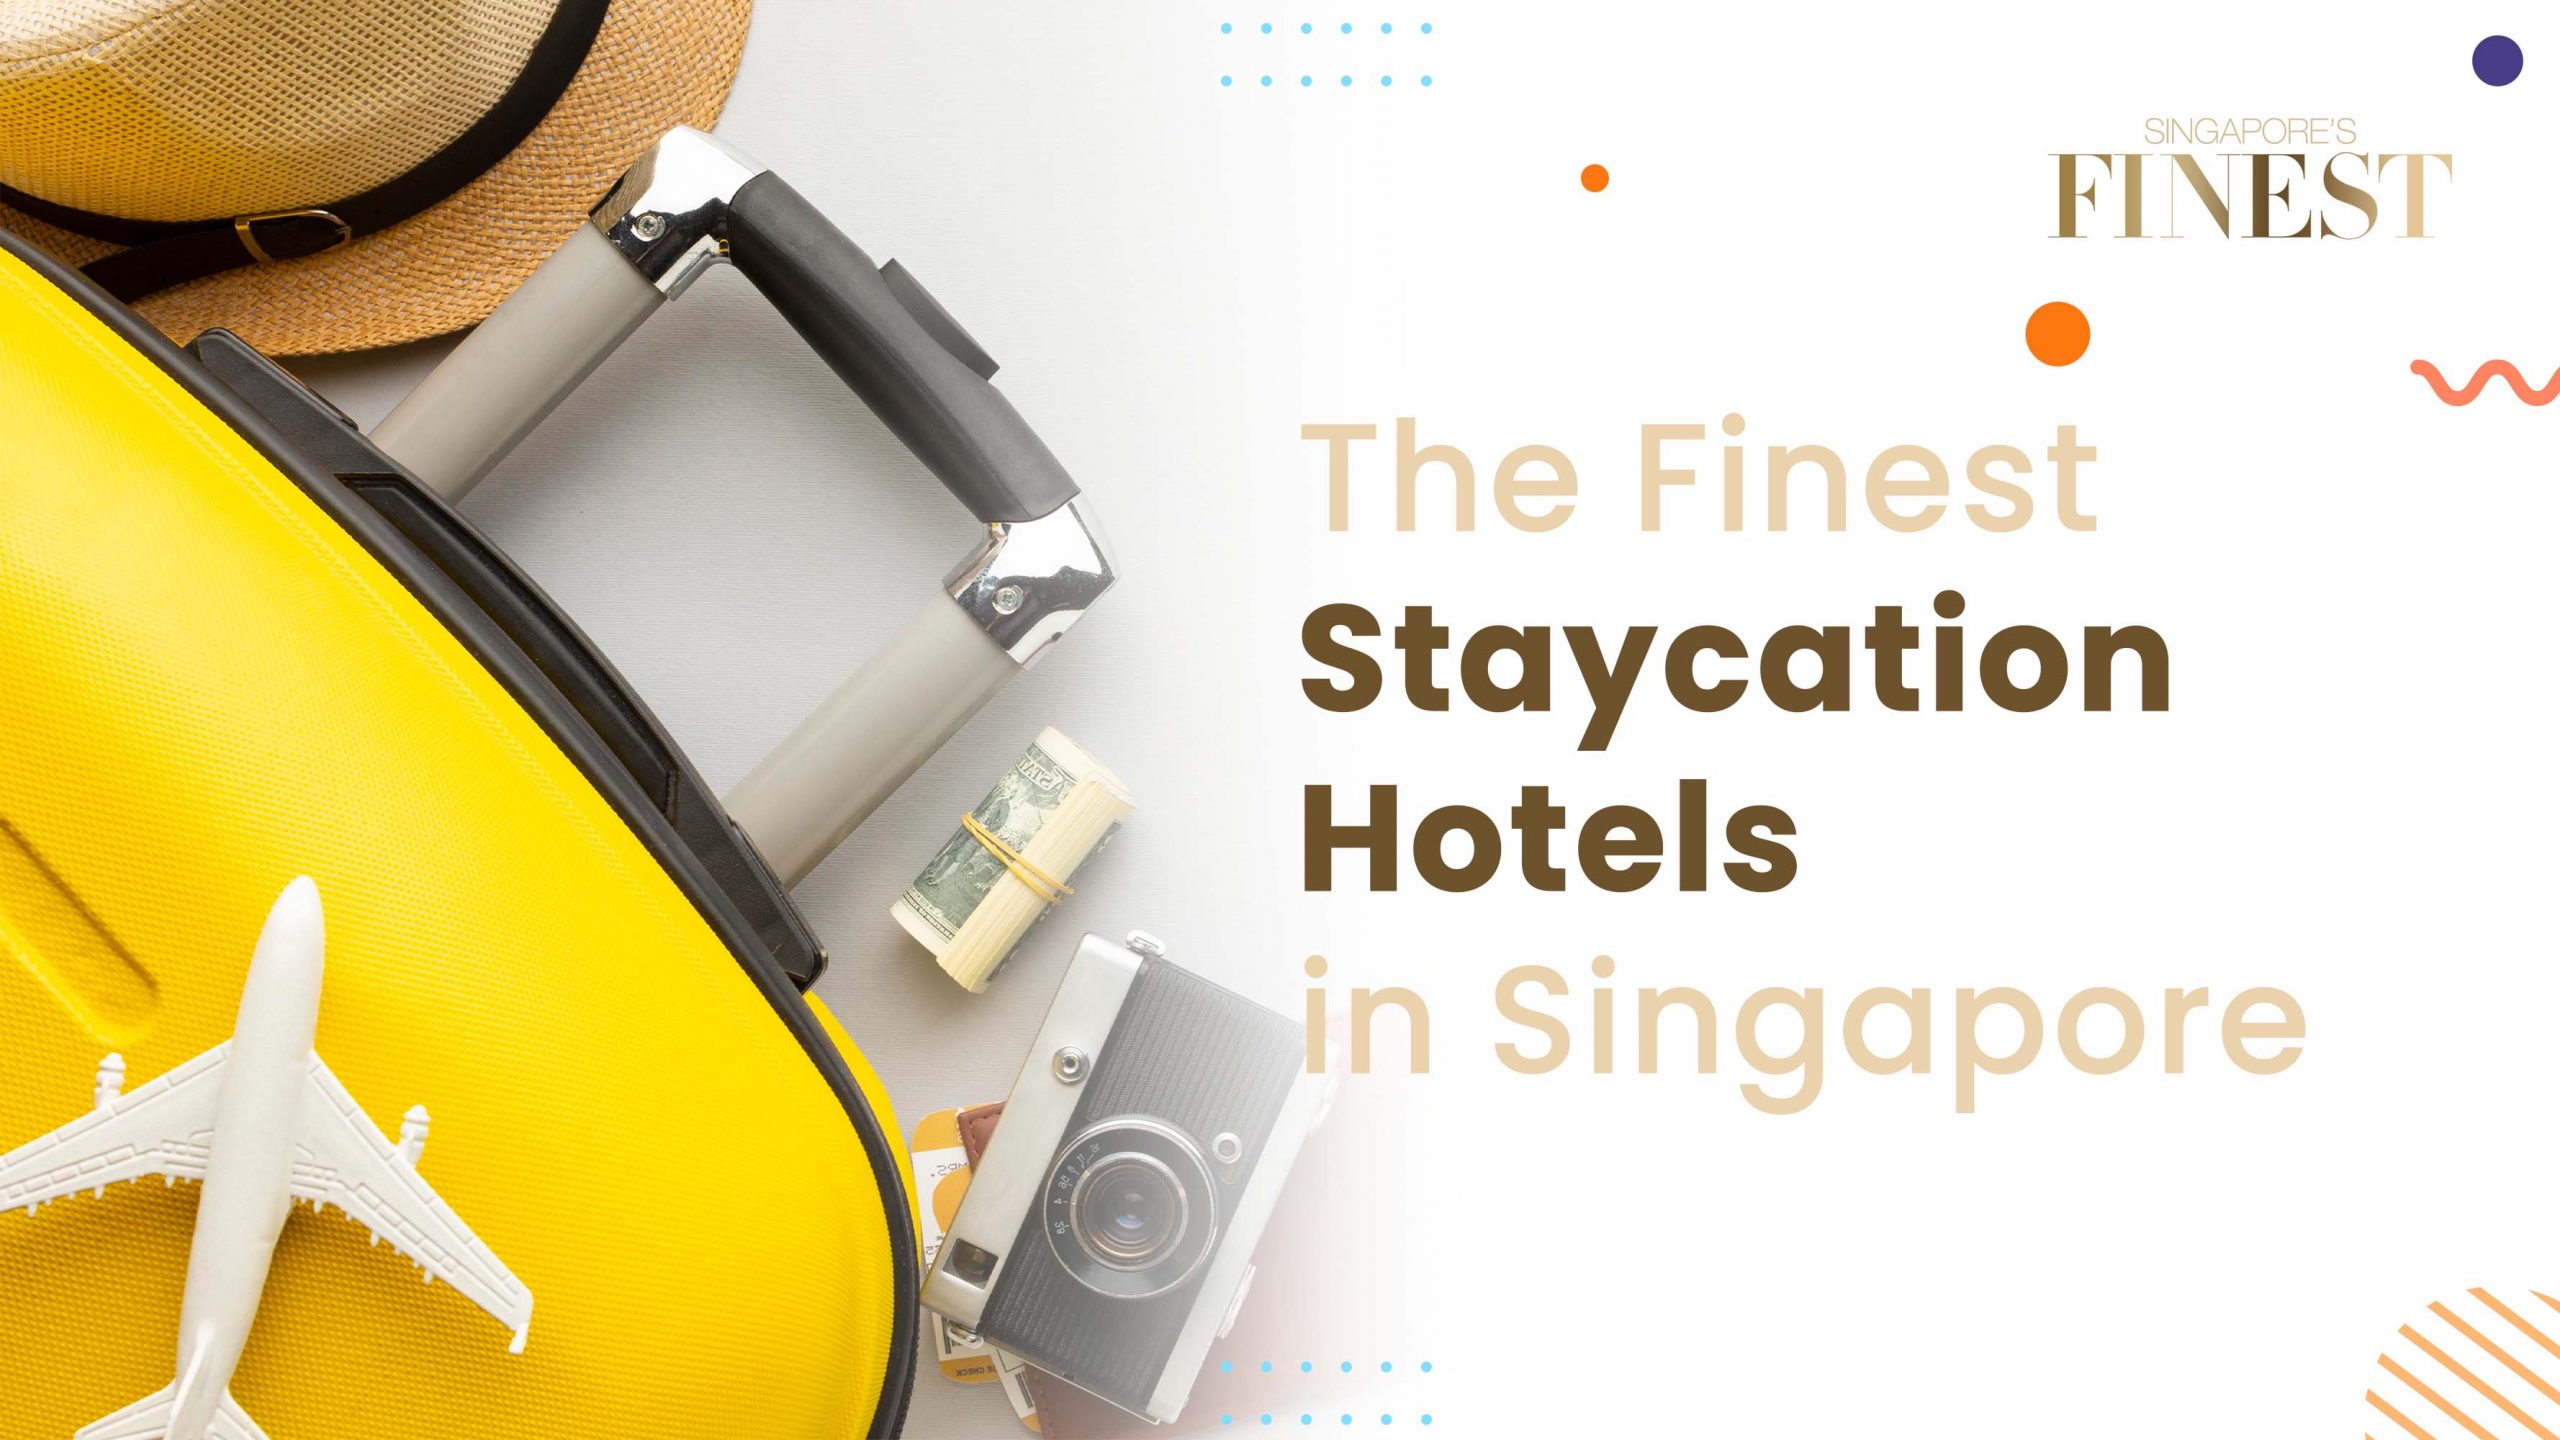 Finest Staycation Hotels in Singapore